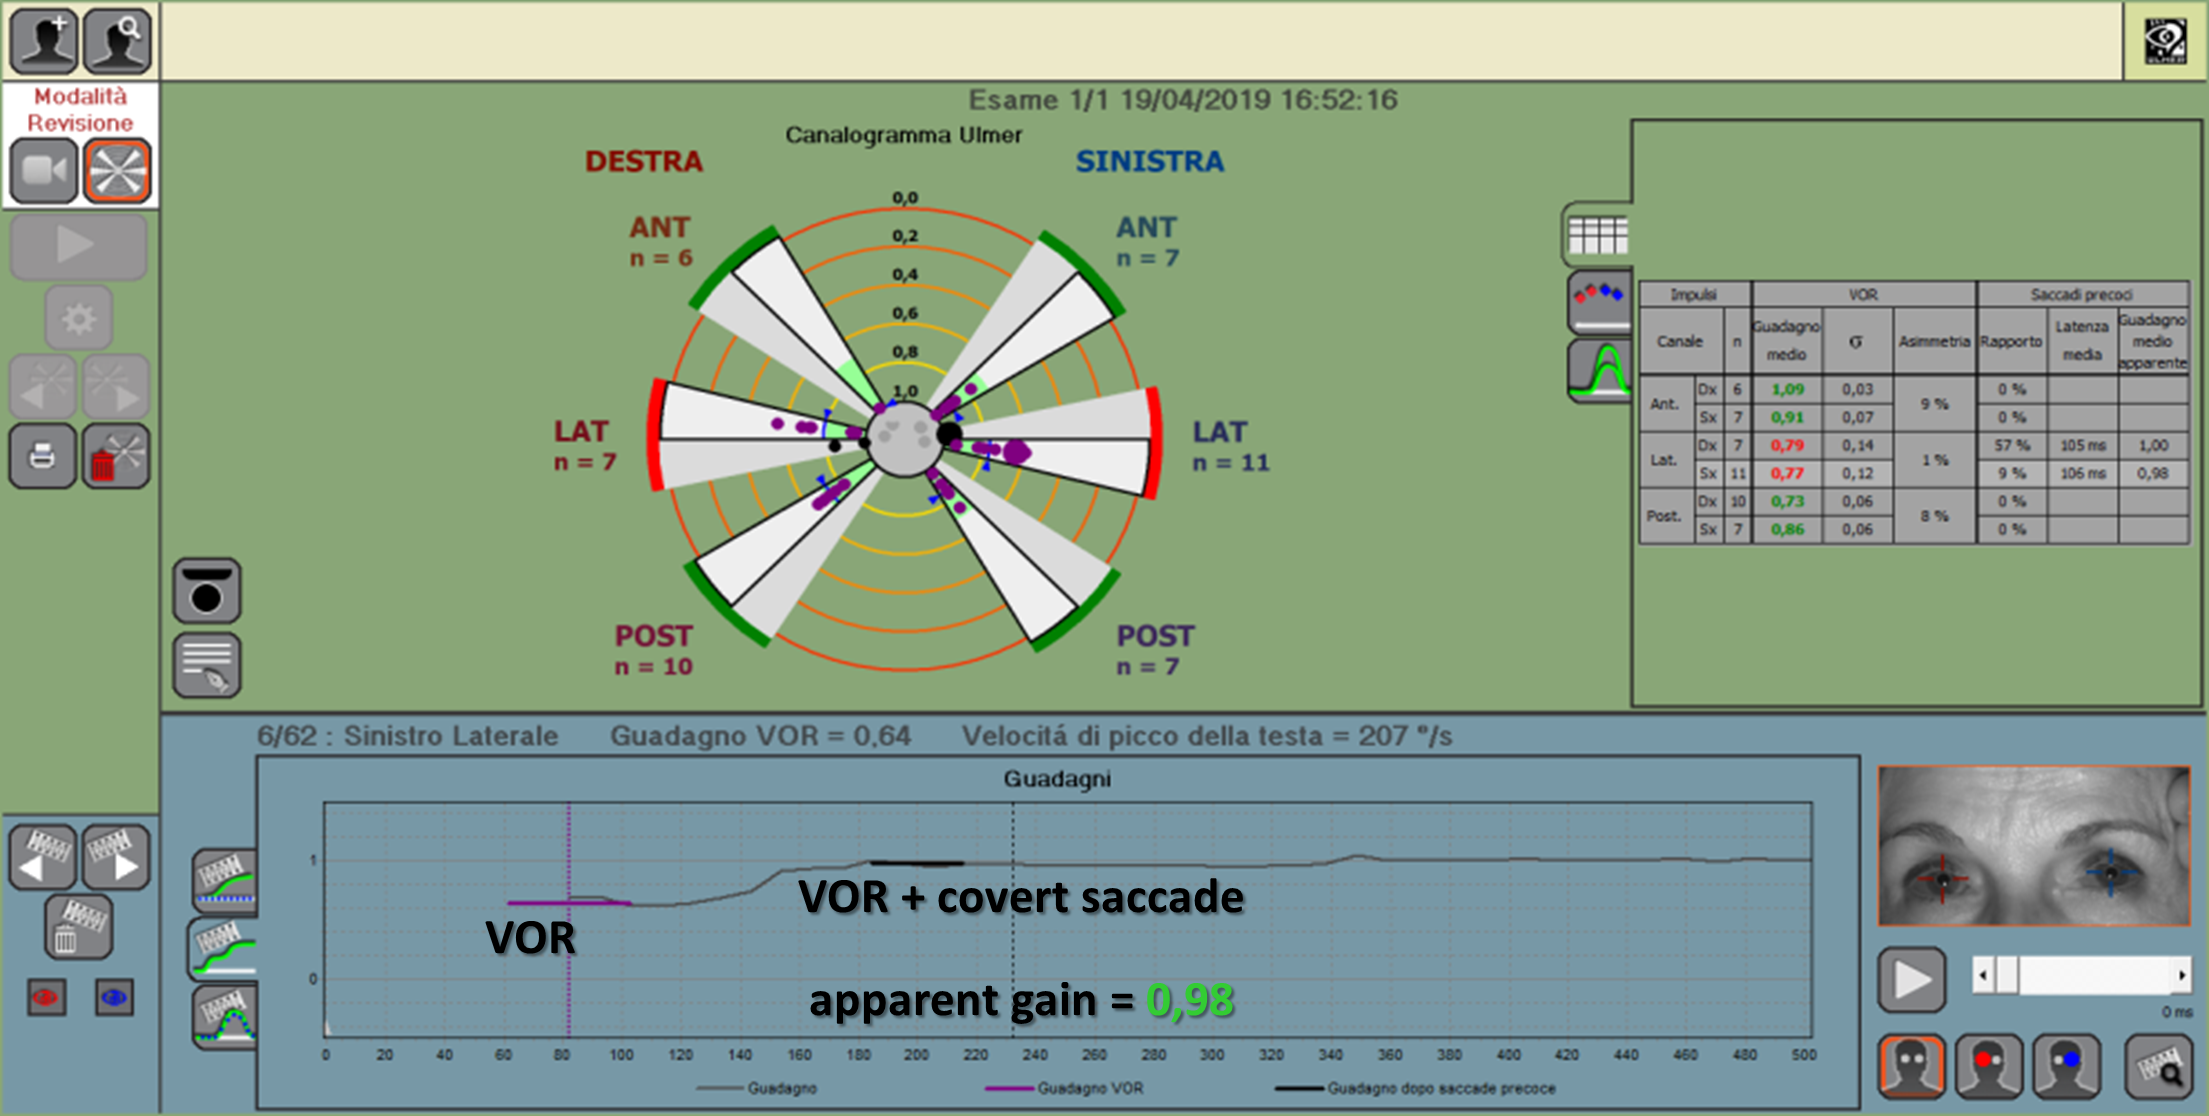 VHIT calculation of the apparent gain after covert saccade